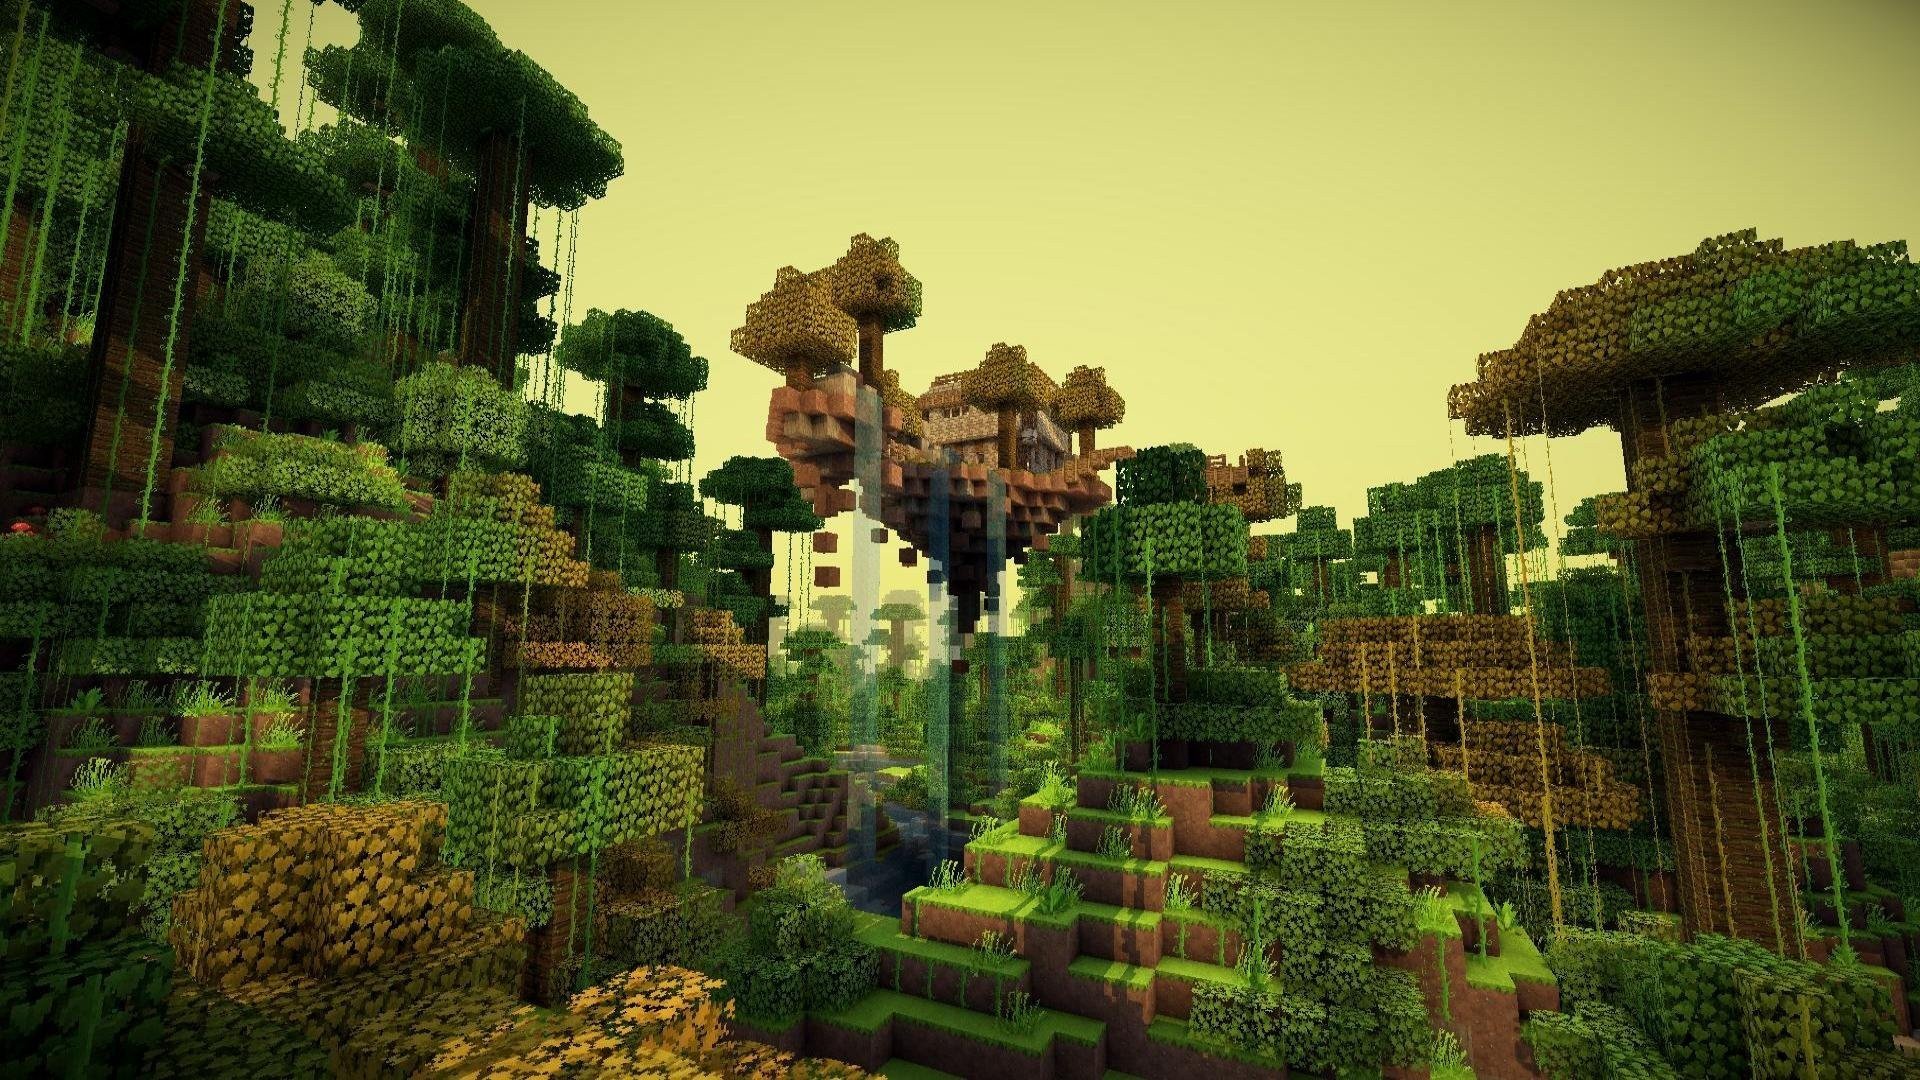 Wallpaper, 1920x1080 px, forest, Minecraft, trees, video games, waterfall 1920x1080